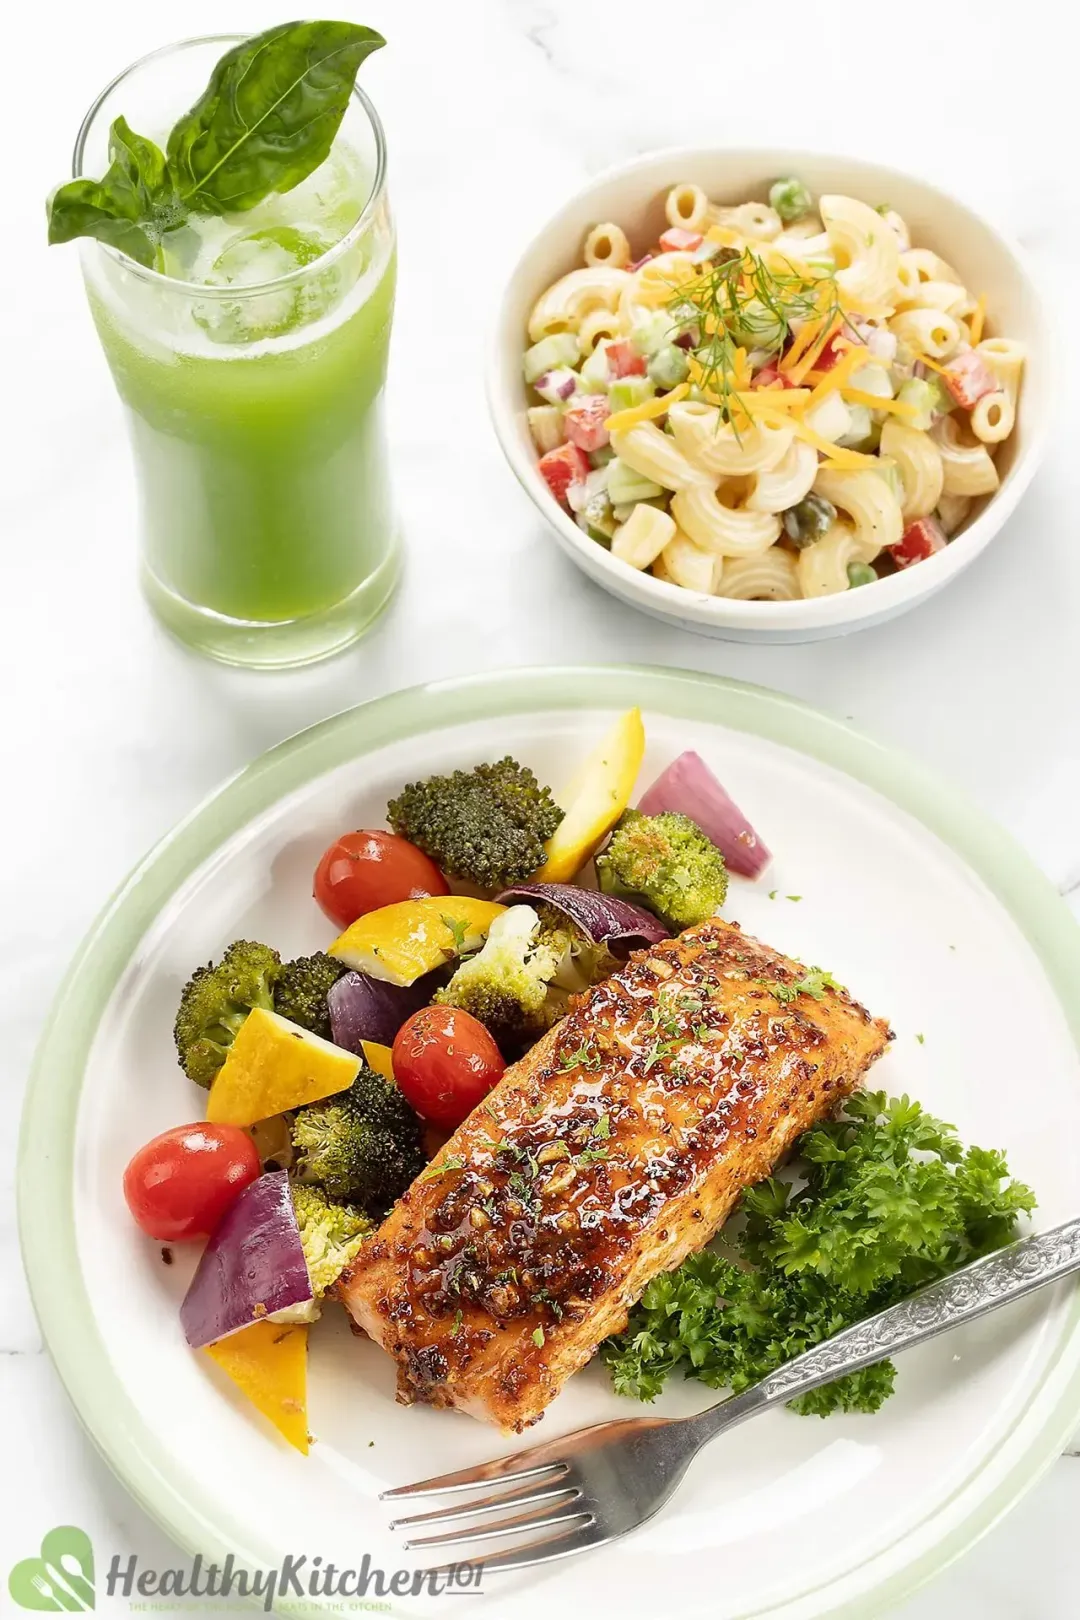 A plate containing a salmon fillet, parsley, cherry tomatoes, broccoli, and other veggies placed next to a small bowl of pasta salad and a glass of green juice